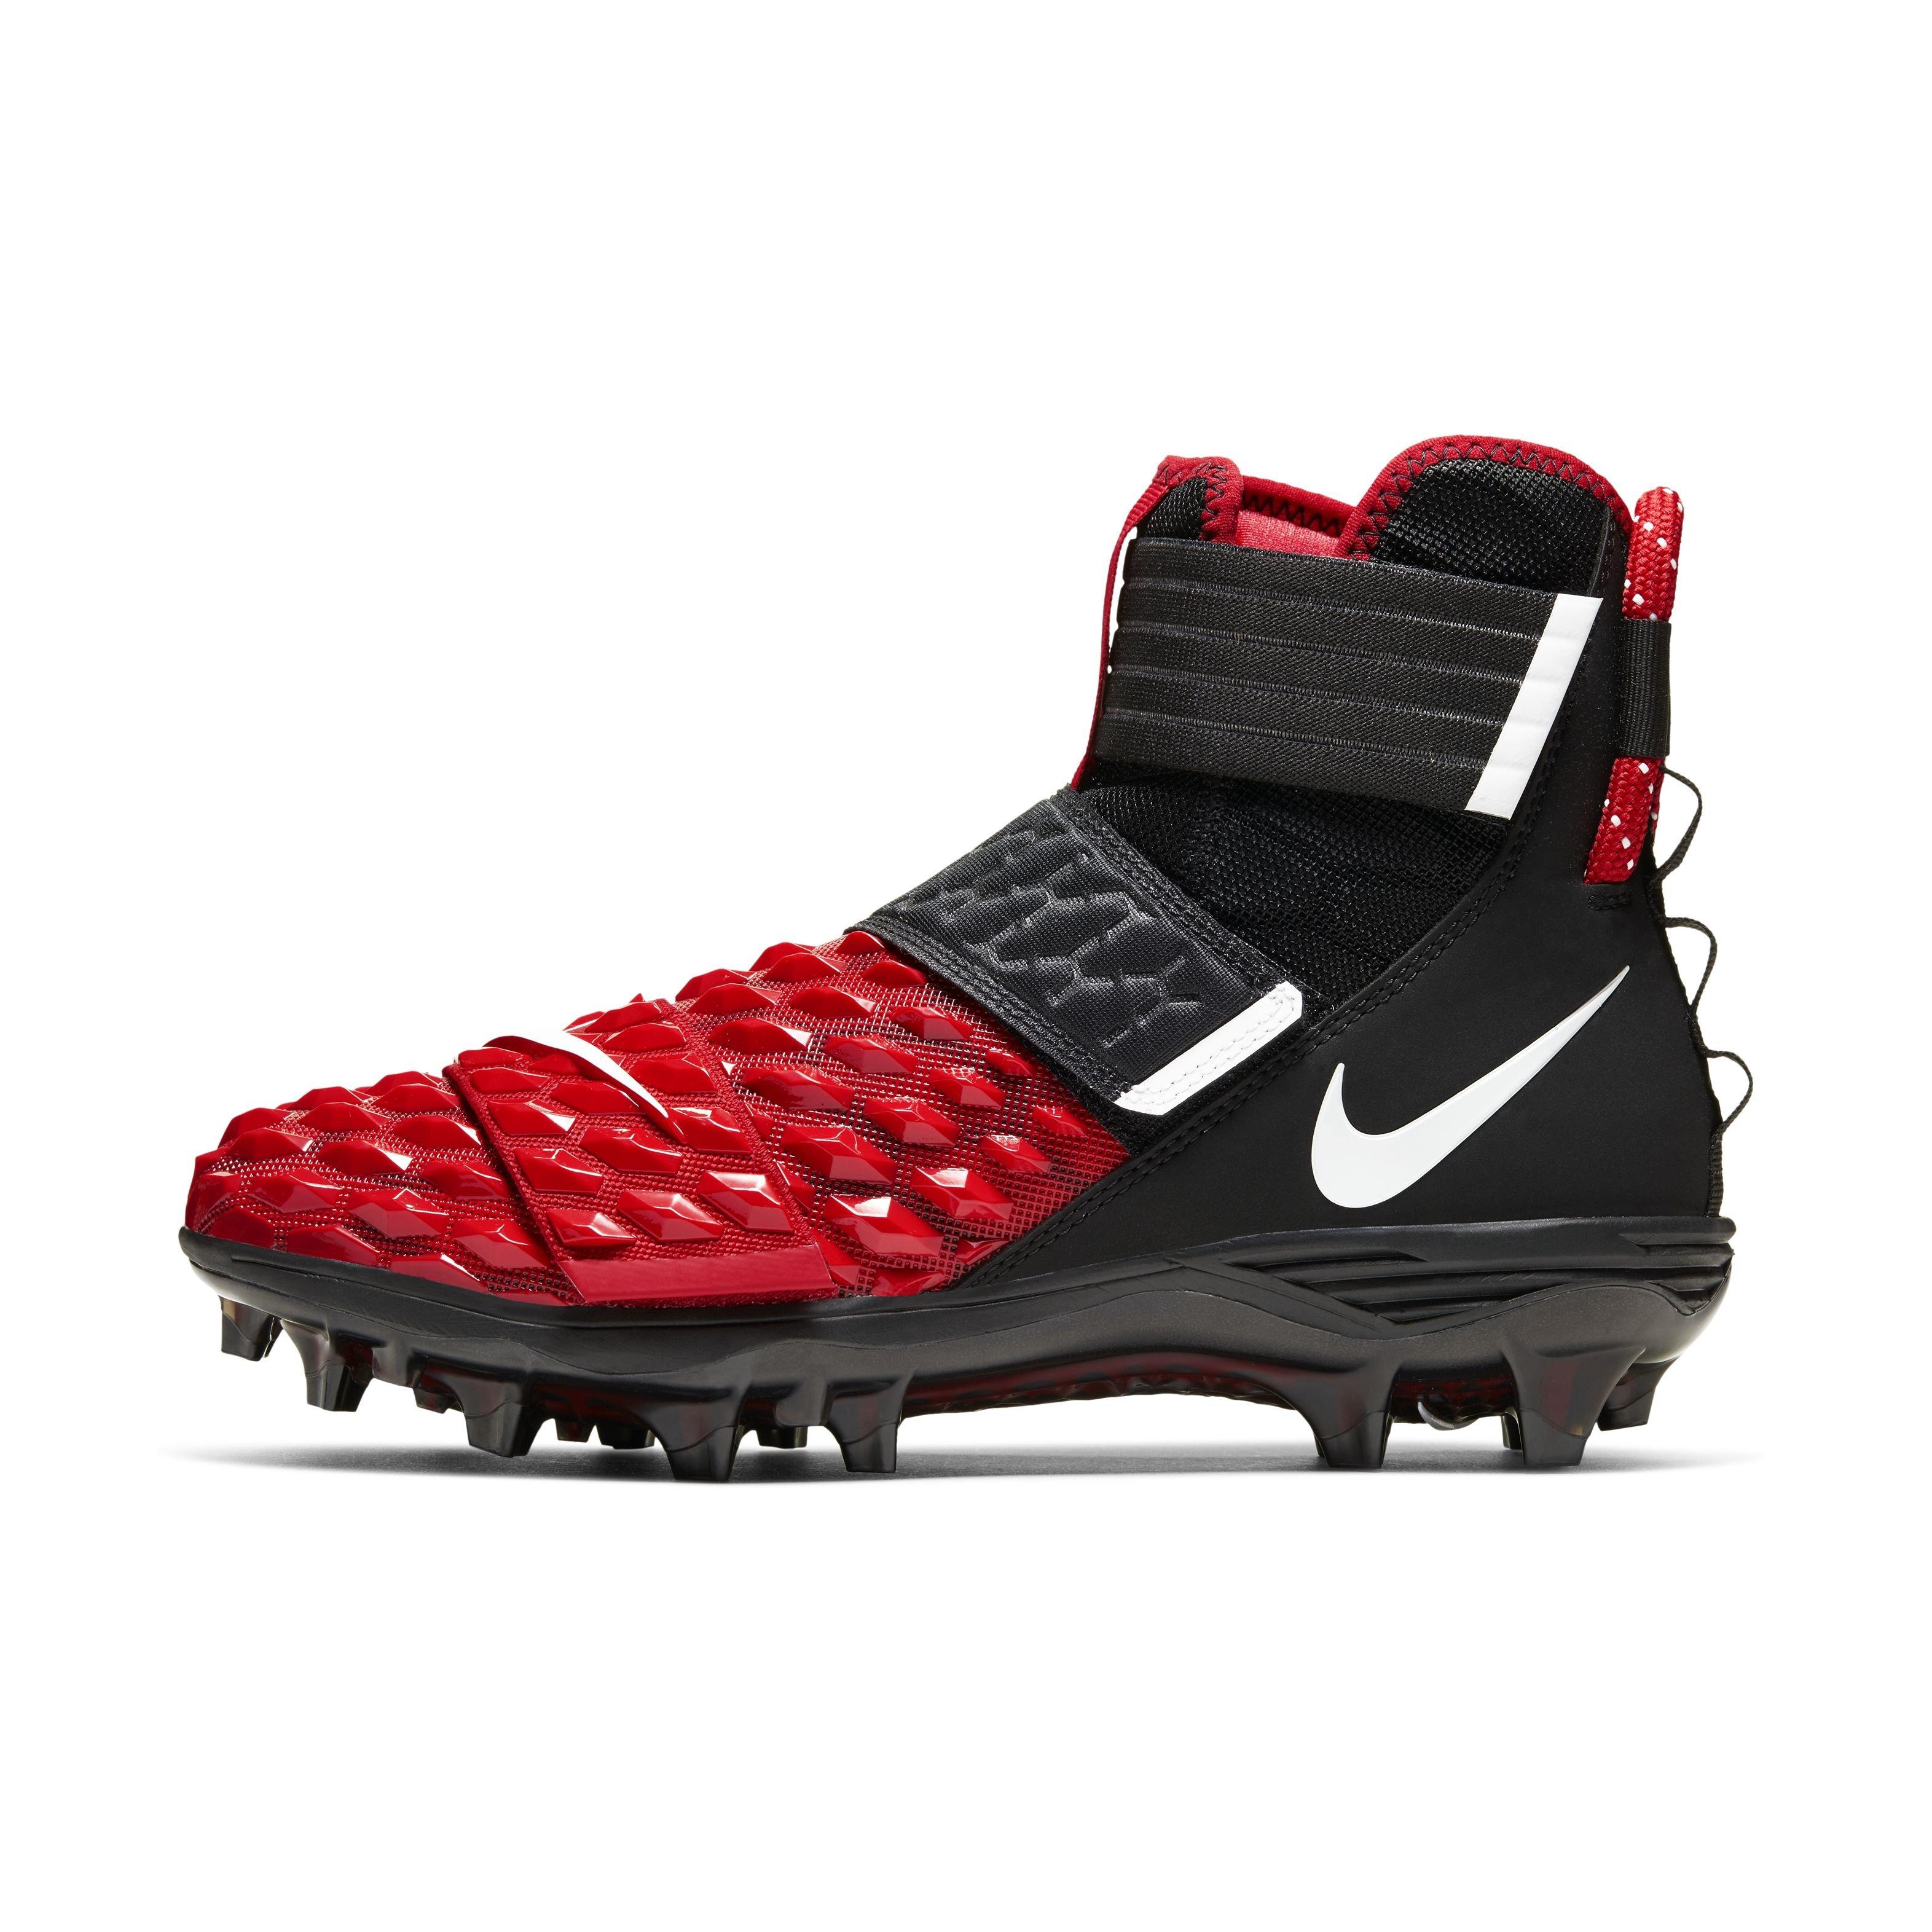 red and white nike football cleats